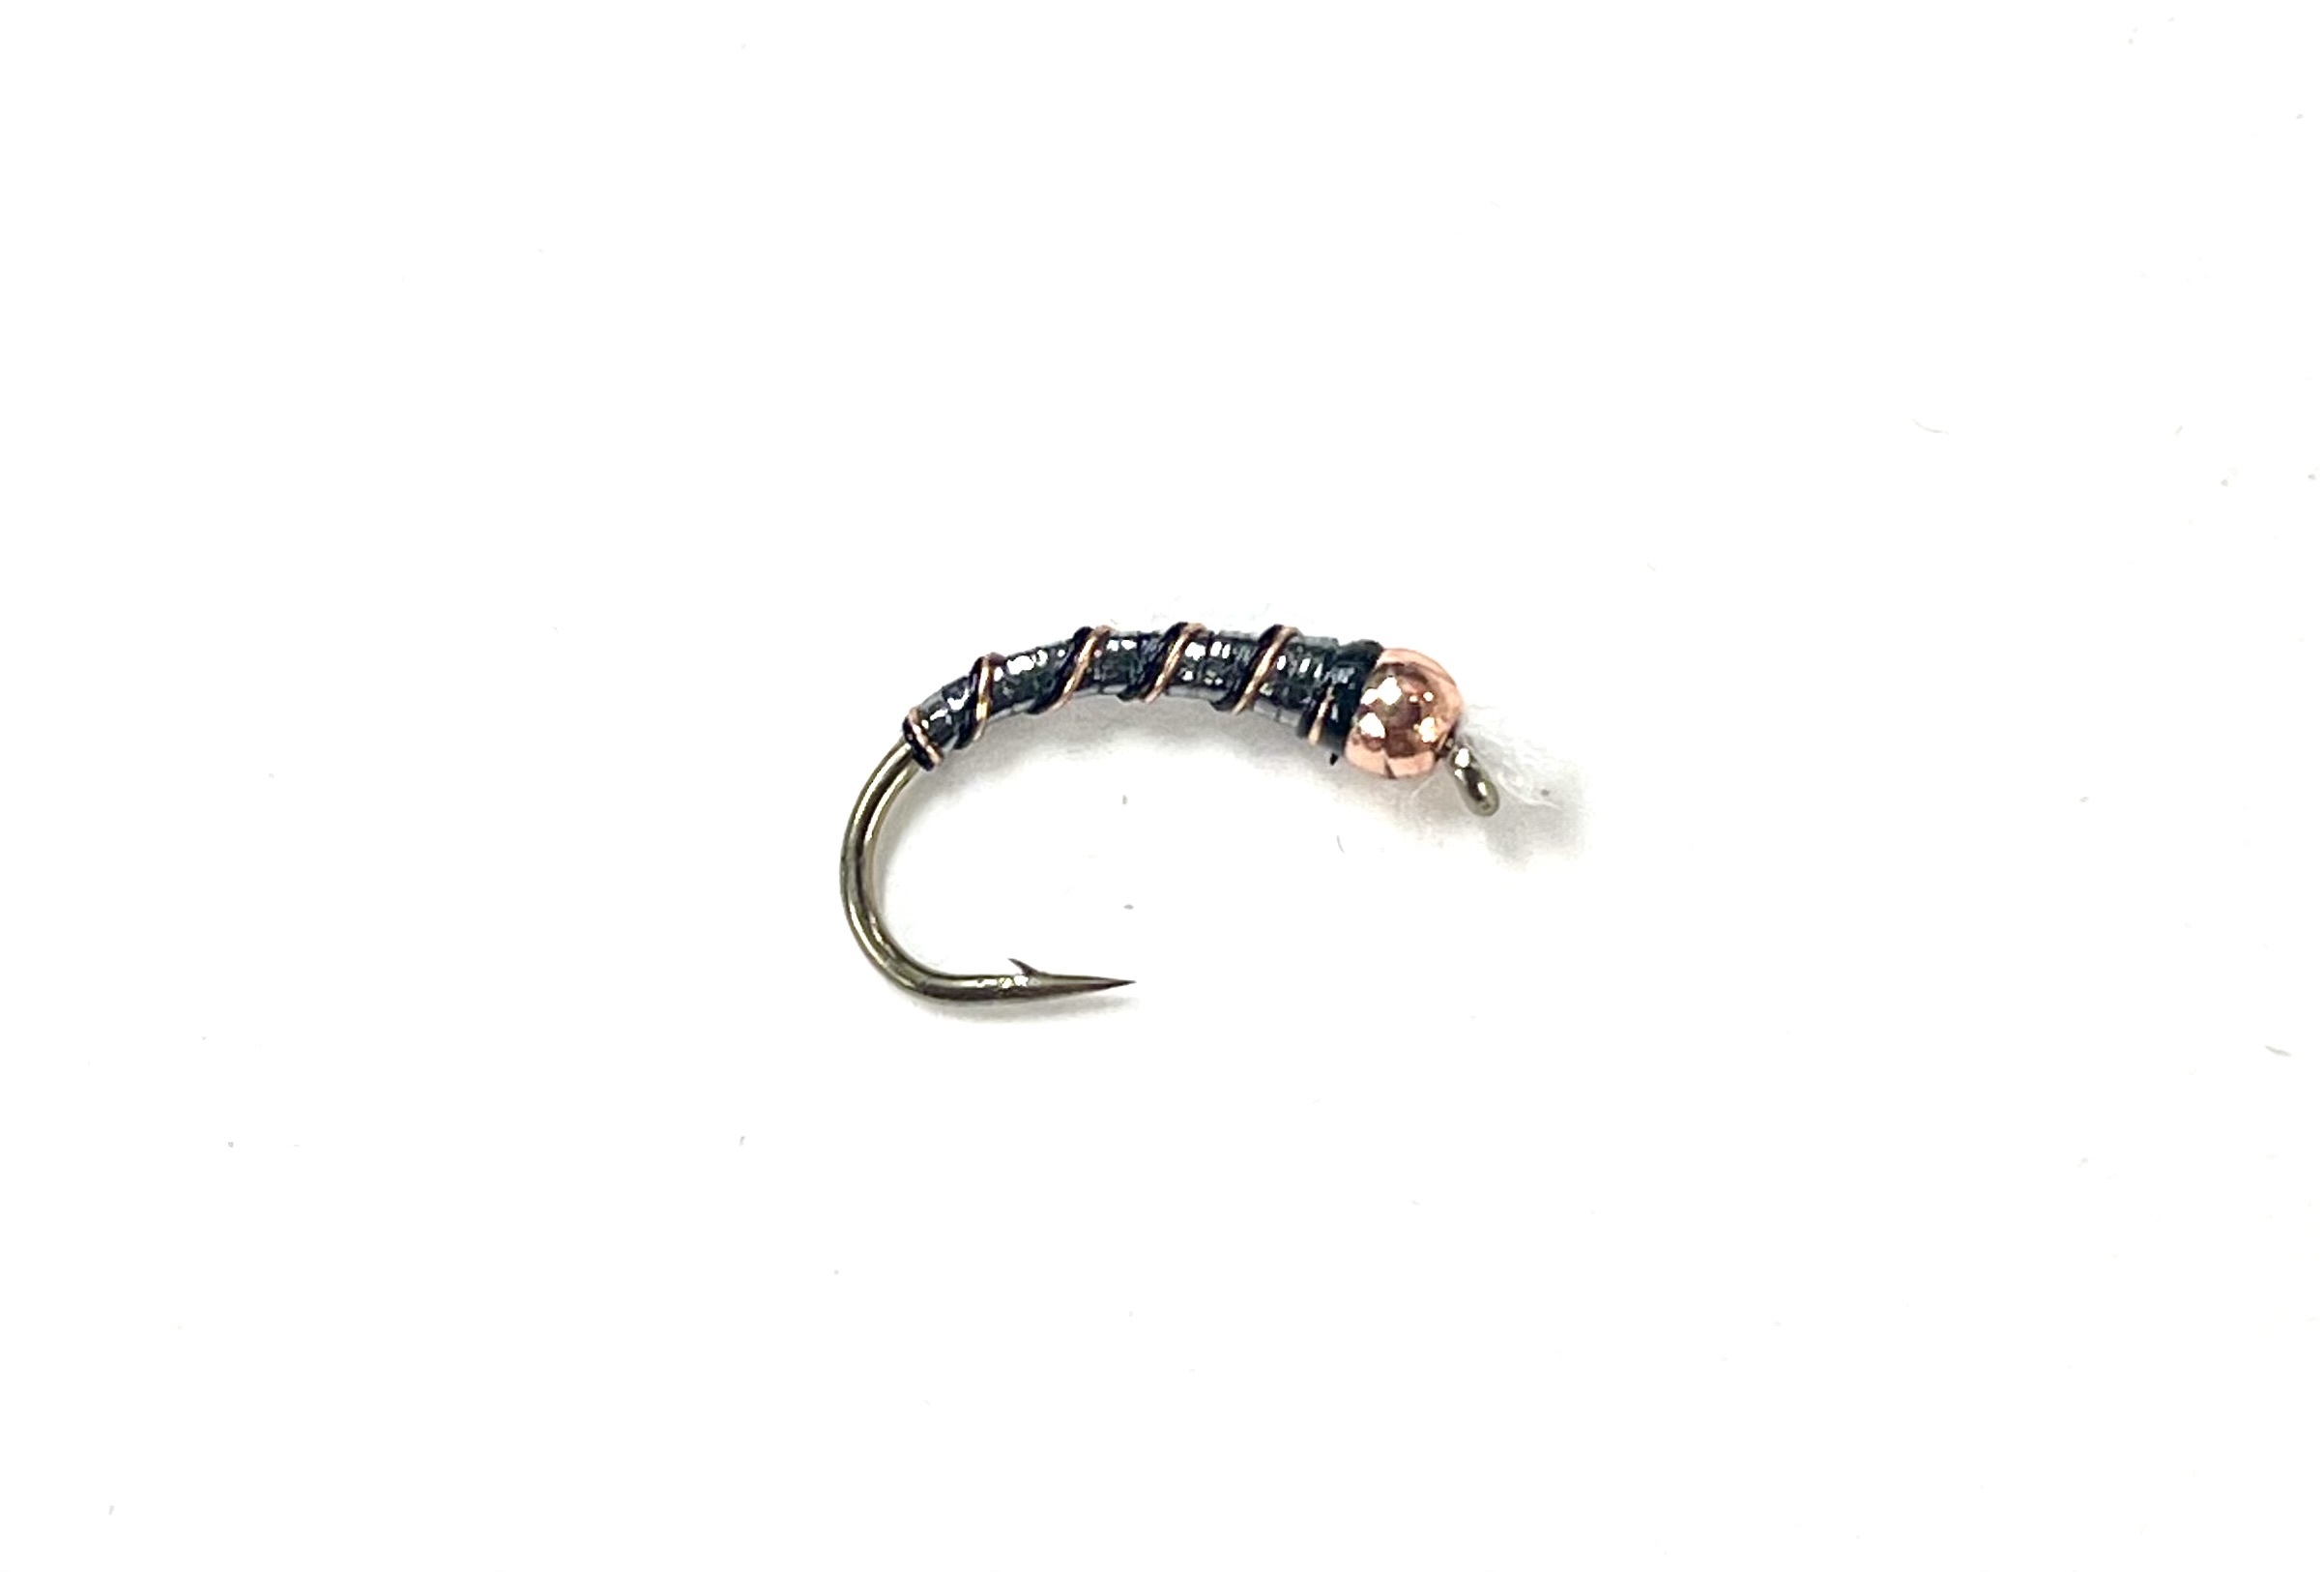 M&Y Copper Bead ASB Double Rib Chironomid - Size 12